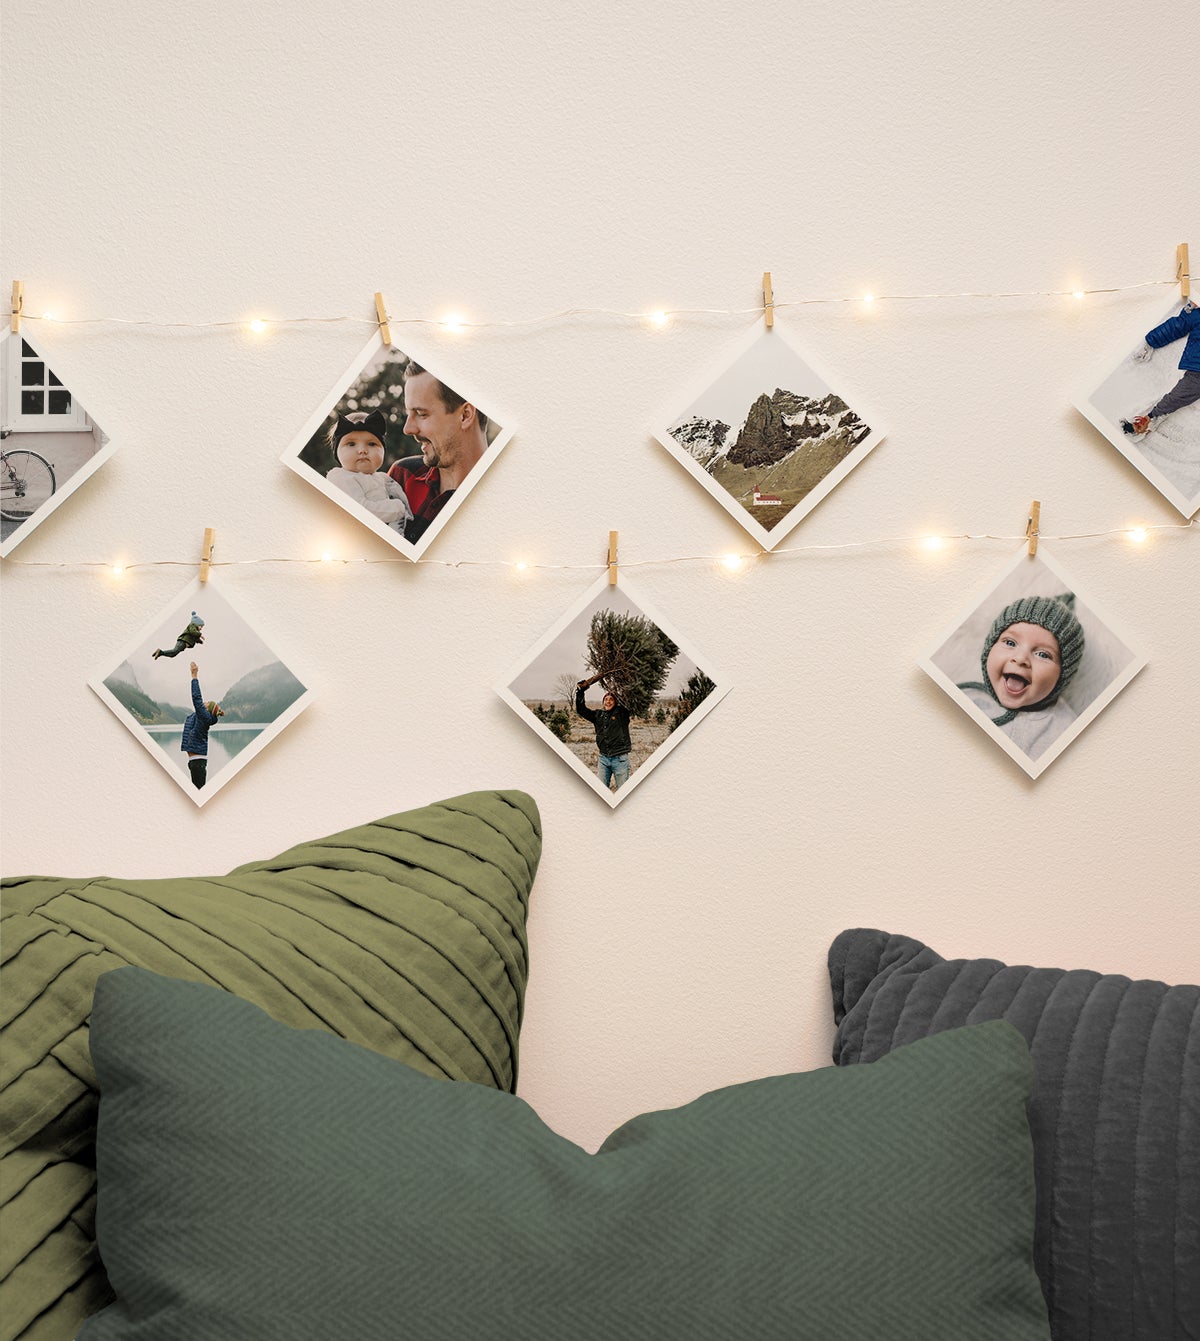 Family photos strung up on the wall using holiday lights